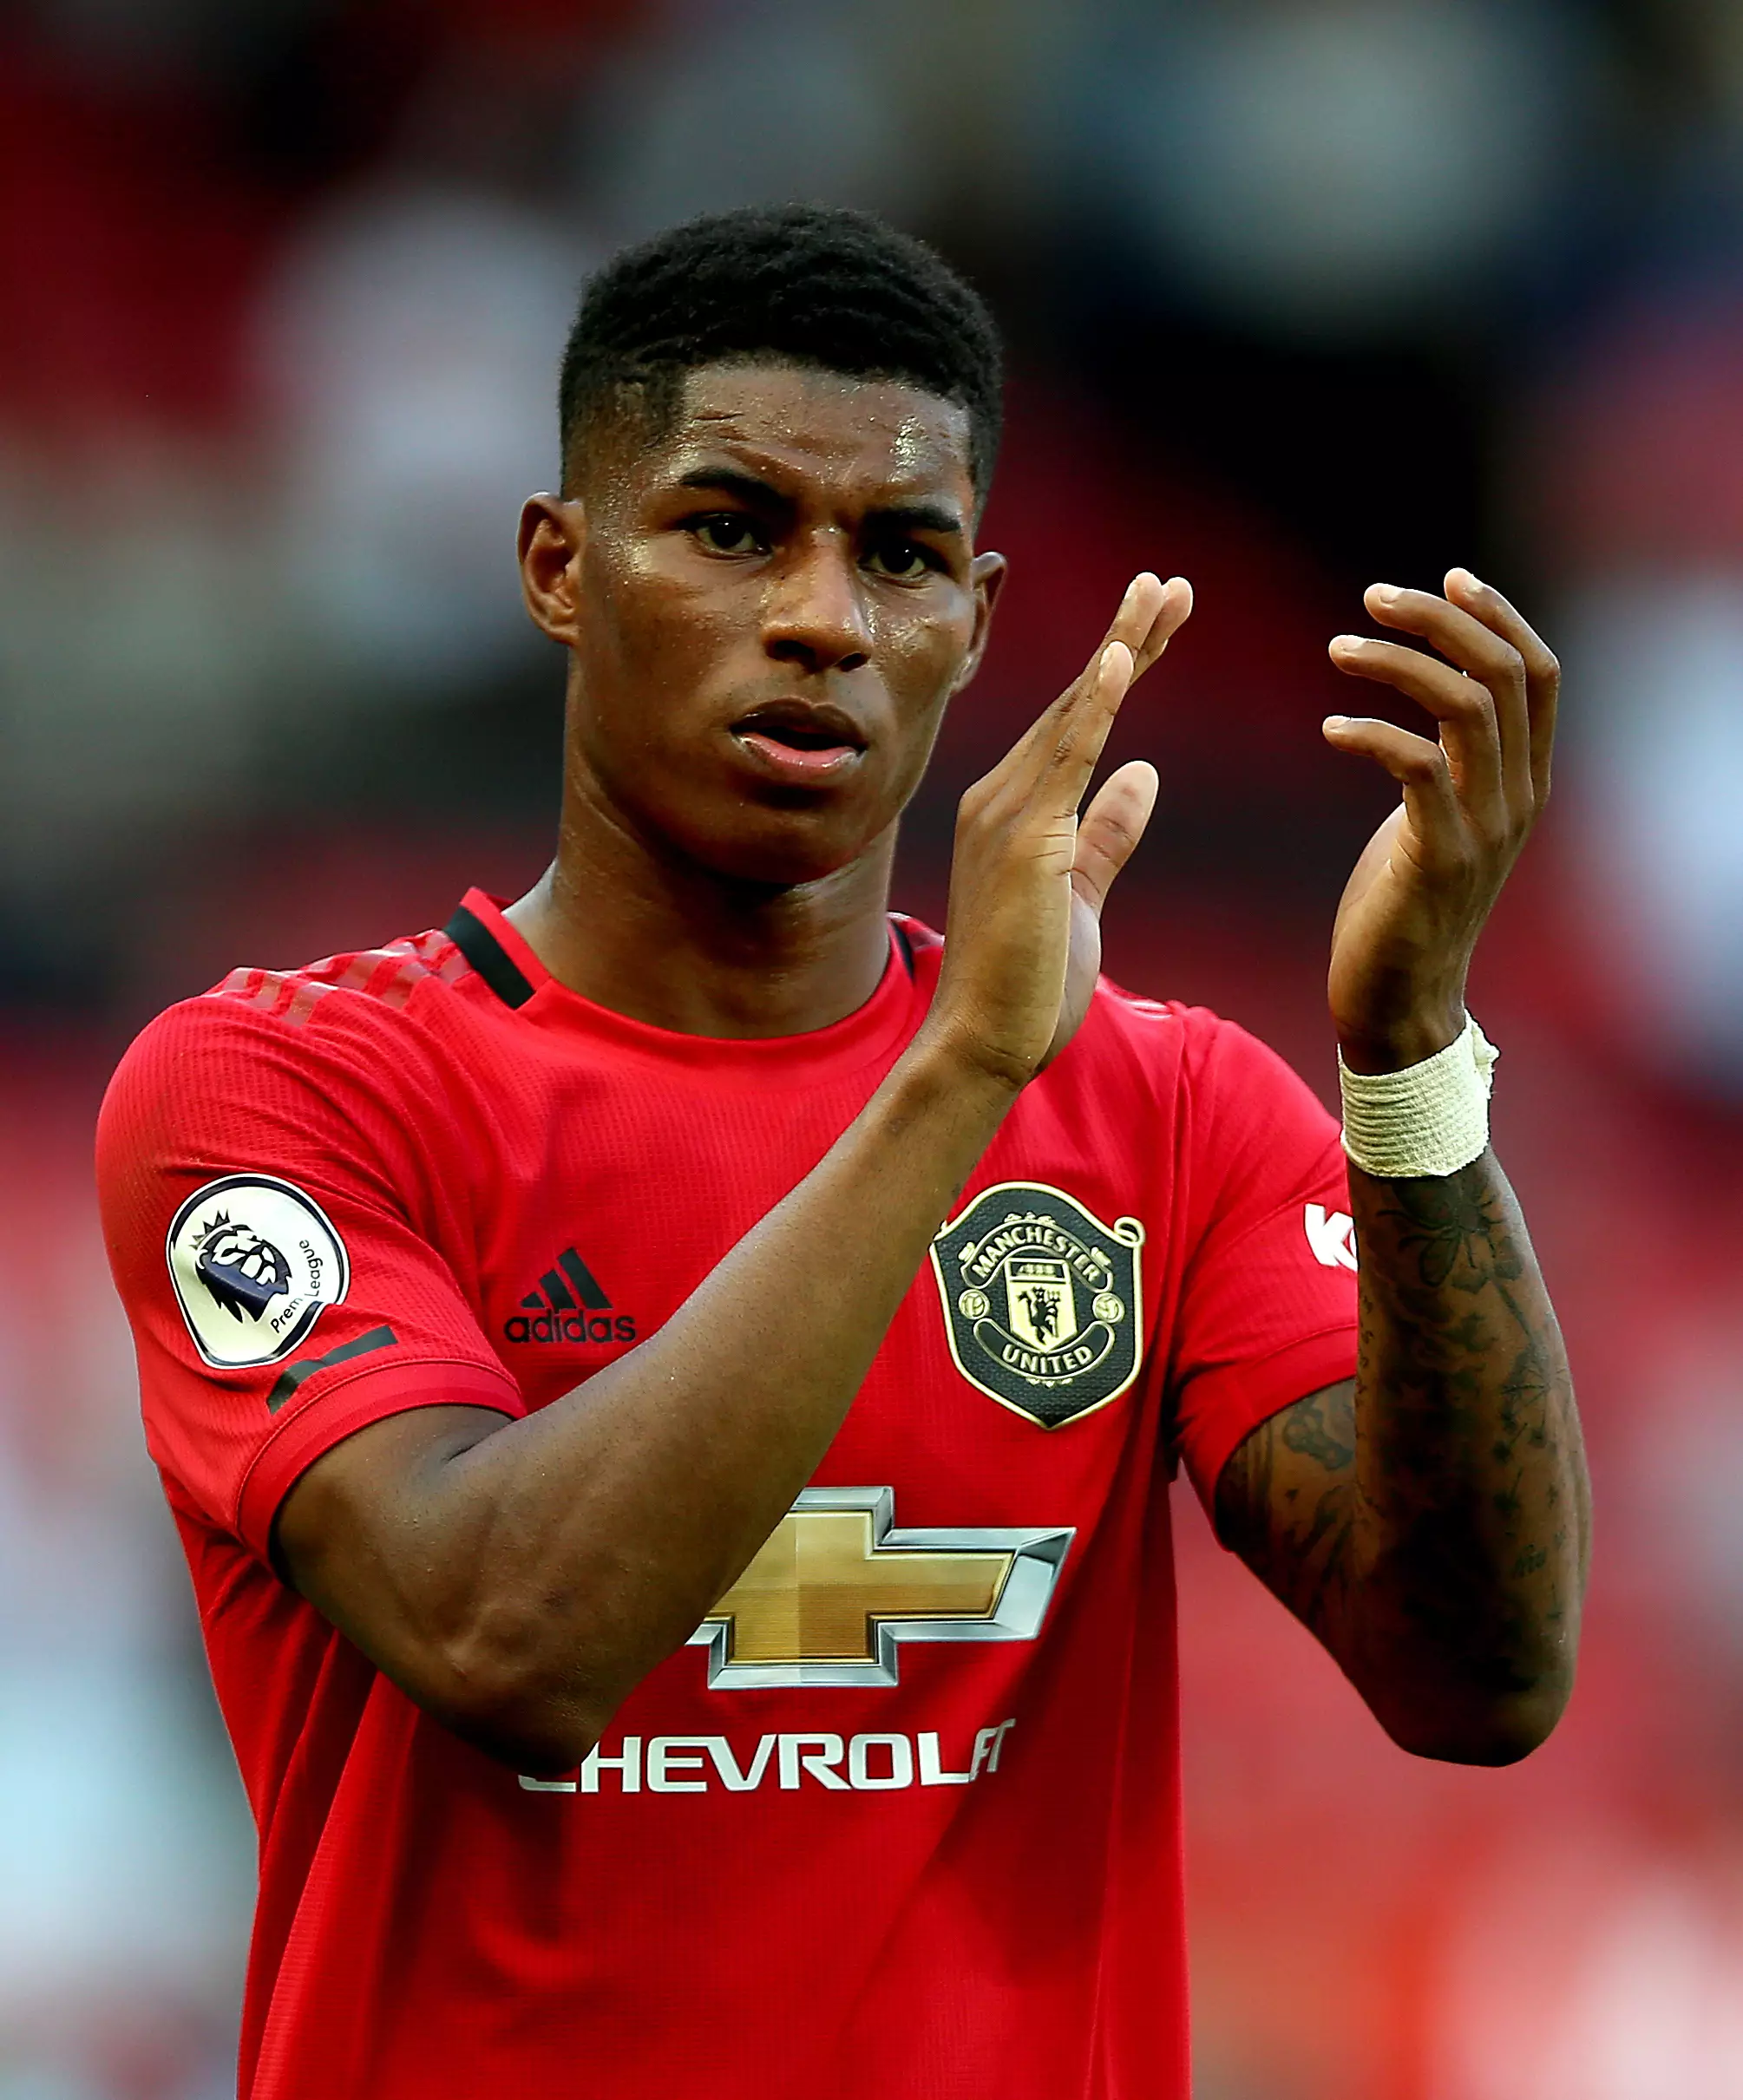 Manchester United footballer Marcus Rashford has been heading up a campaign to extend free school meal vouchers (